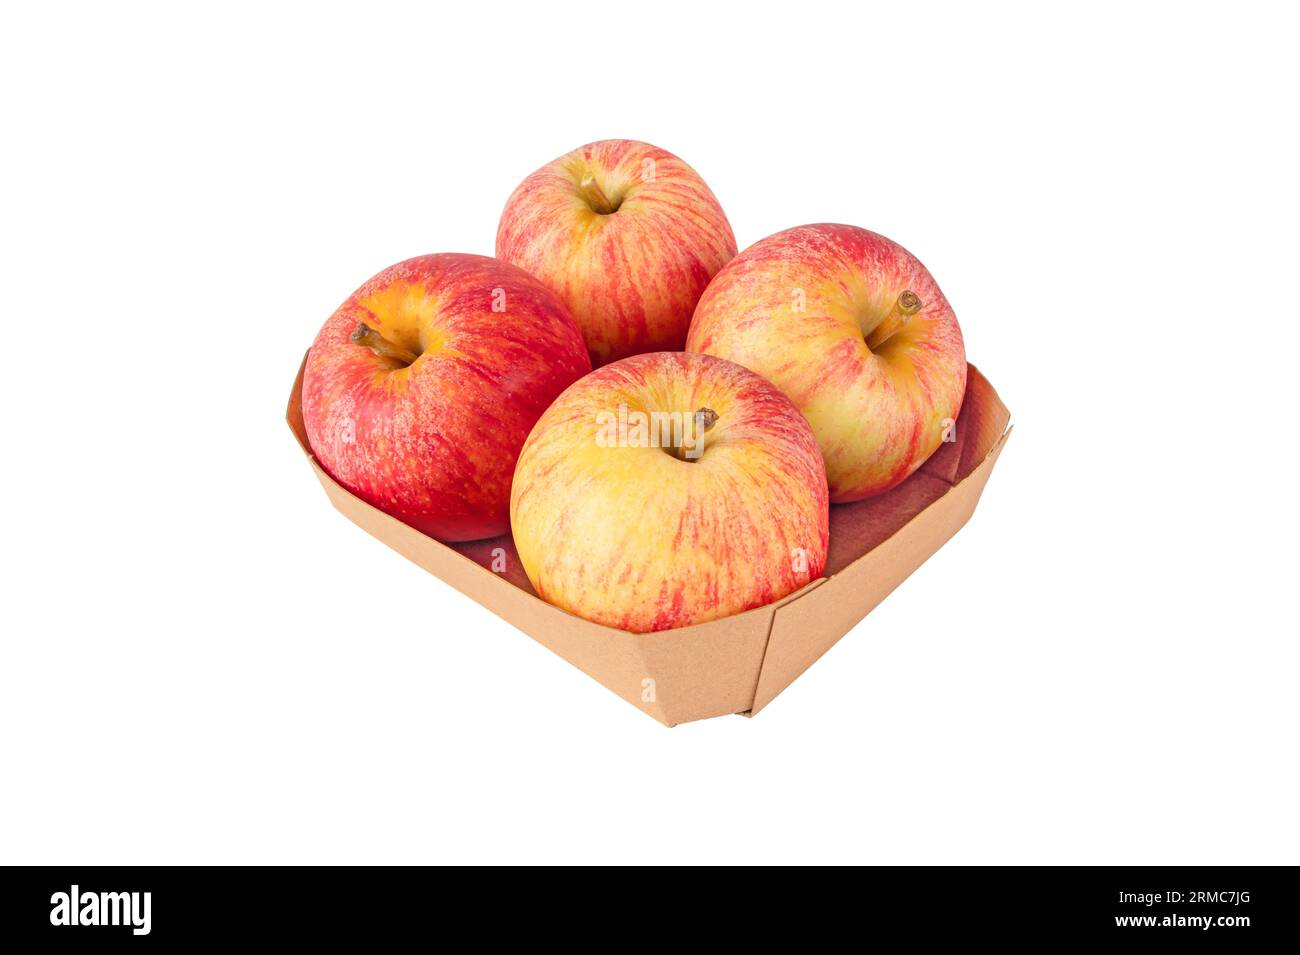 Four red striped apple fruits in the brown recycled paper tray isolated on white. Stock Photo